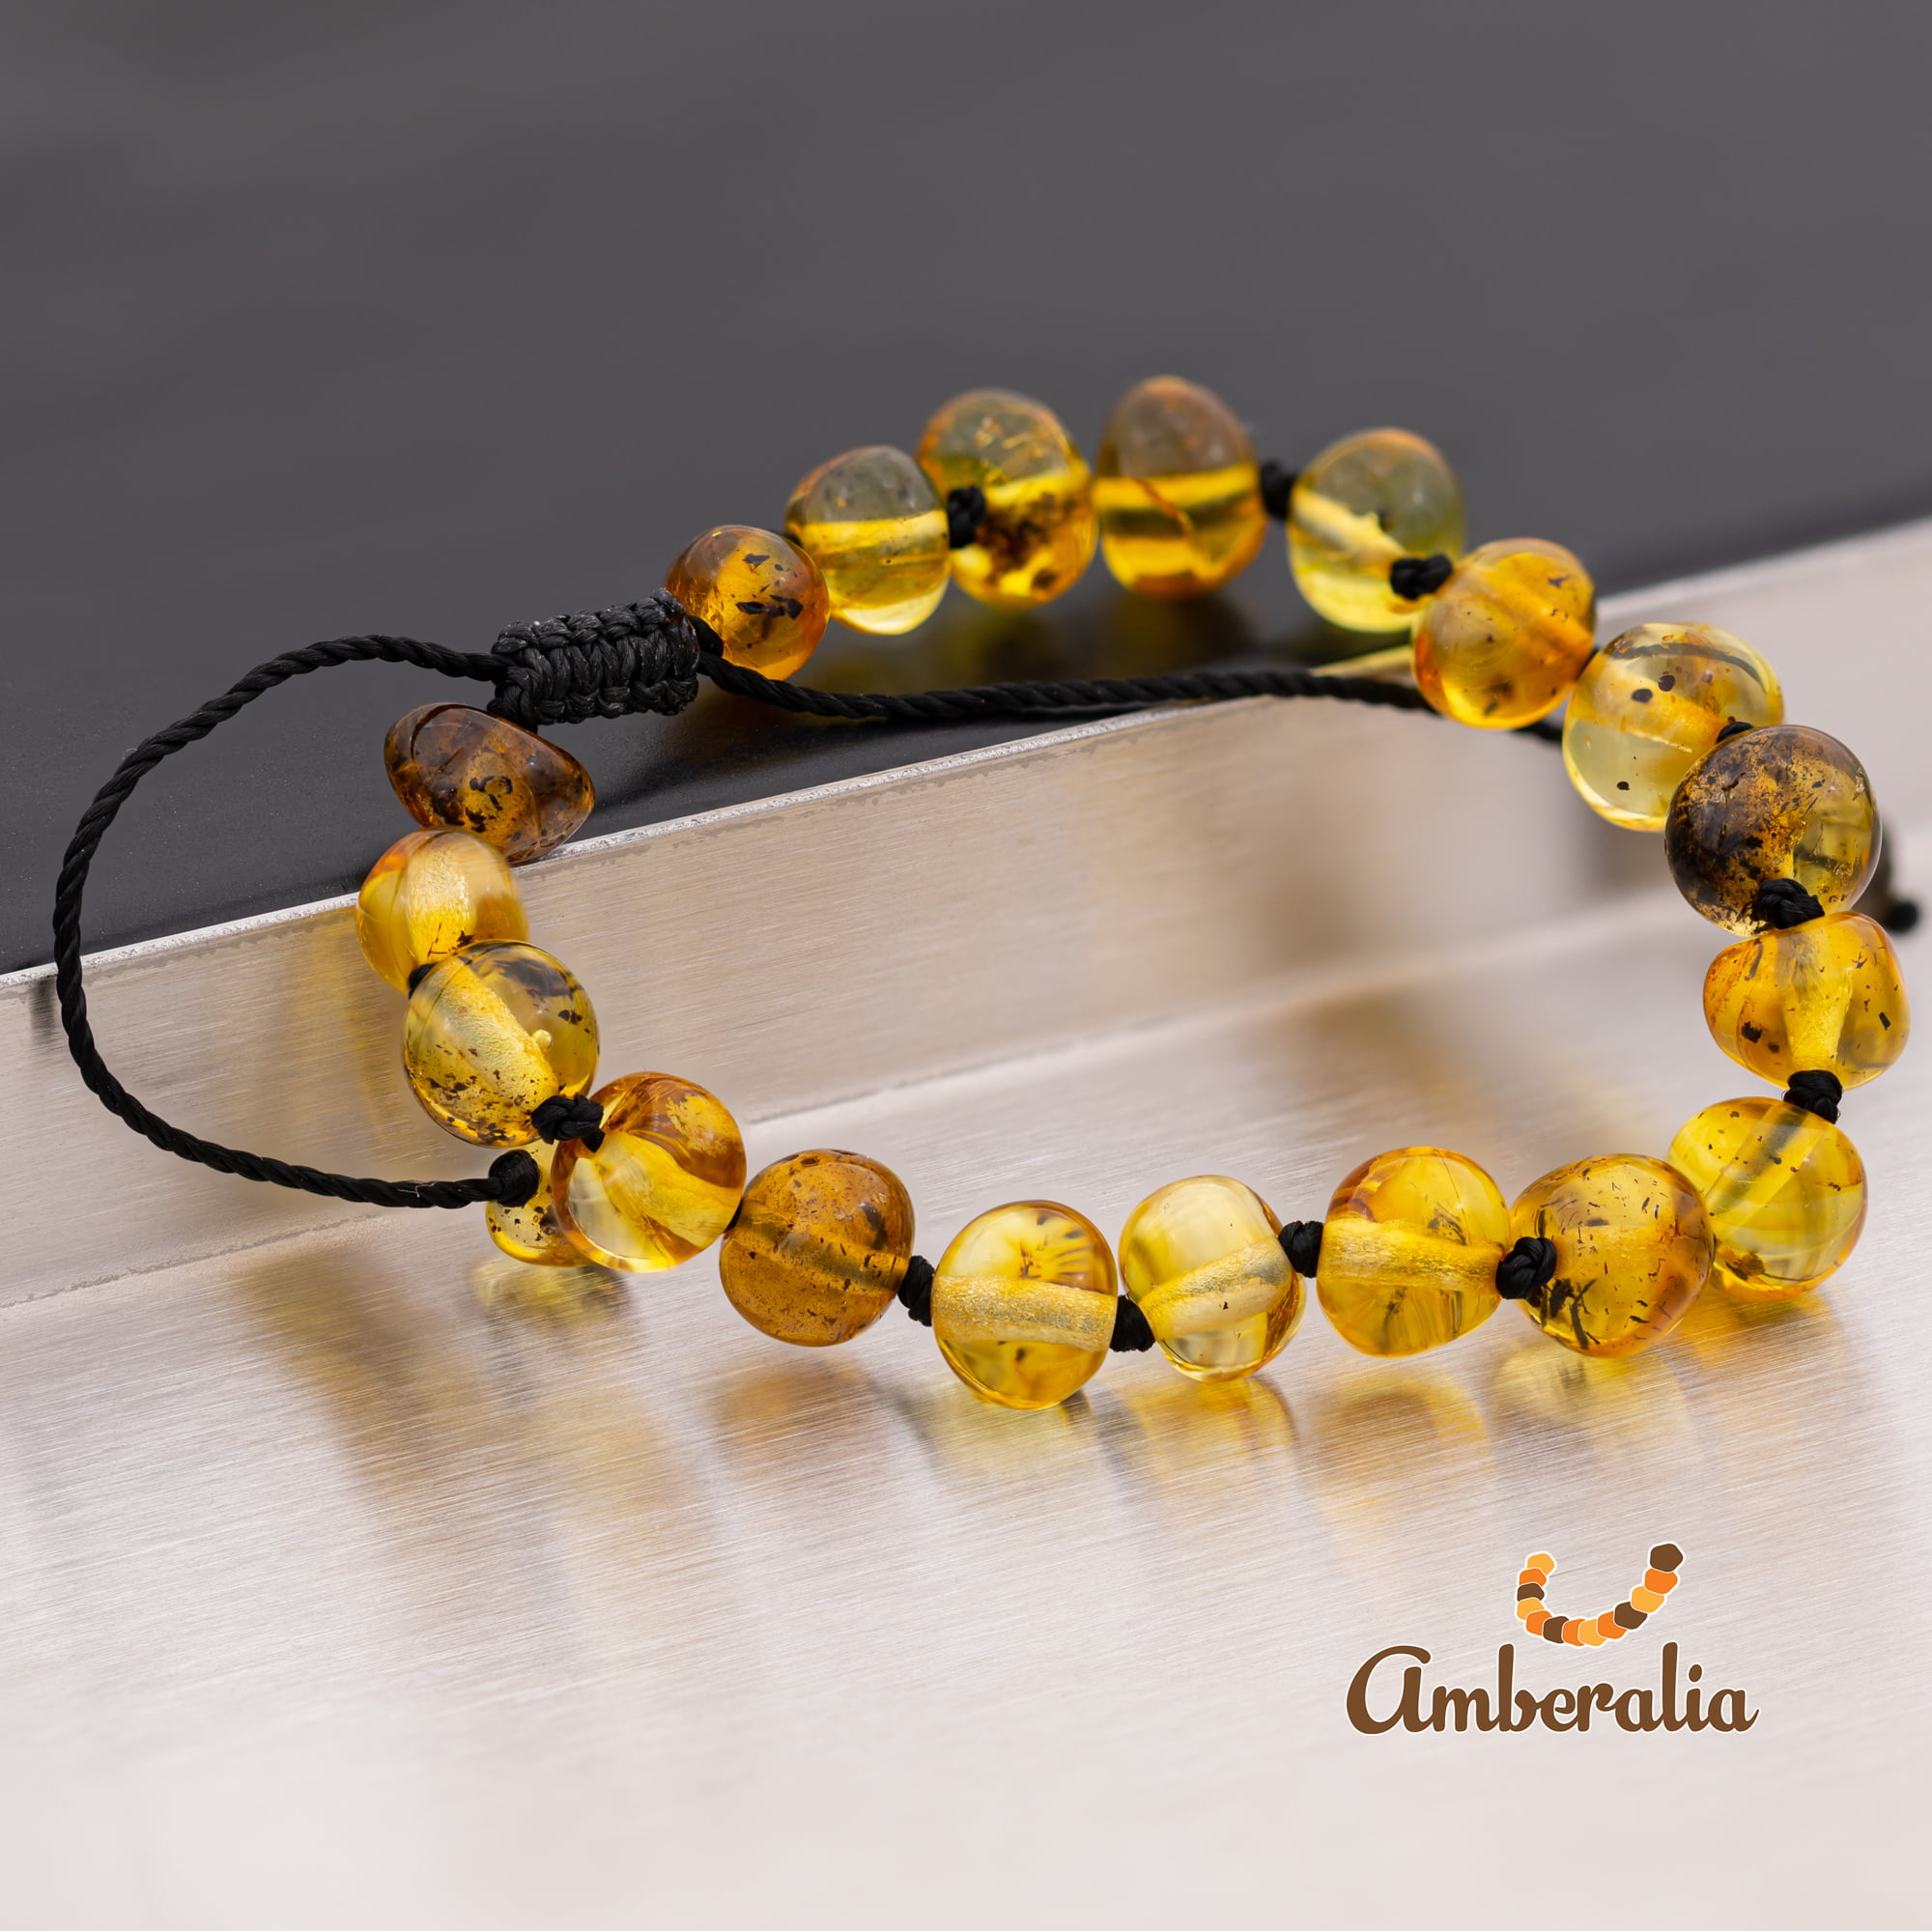 Lolly Llama Adult Baltic Amber Bracelet - All Natural Pain Relief for  Adults to Help Migraines, Sinus, Arthritis and More! - Multi-Stone … :  Amazon.sg: Health, Household and Personal Care